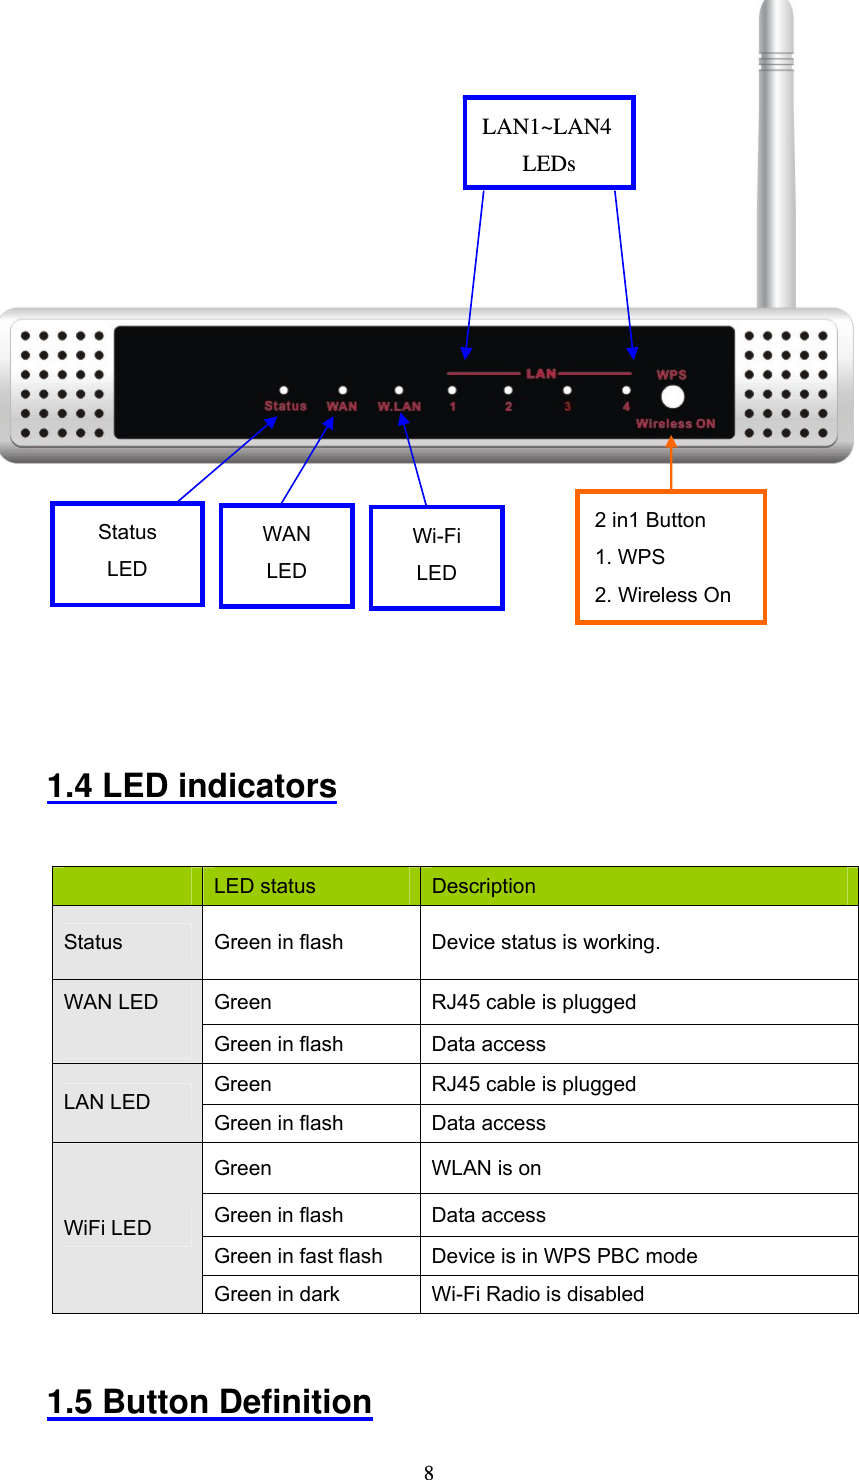  8       1.4 LED indicators       LED status  Description Status  Green in flash  Device status is working. Green  RJ45 cable is plugged WAN LED  Green in flash  Data access   Green  RJ45 cable is plugged LAN LED Green in flash  Data access   Green  WLAN is on Green in flash  Data access Green in fast flash  Device is in WPS PBC mode   WiFi LED Green in dark  Wi-Fi Radio is disabled  1.5 Button Definition LAN1~LAN4 LEDs Wi-Fi LED WAN LED 2 in1 Button 1. WPS 2. Wireless On Status LED 